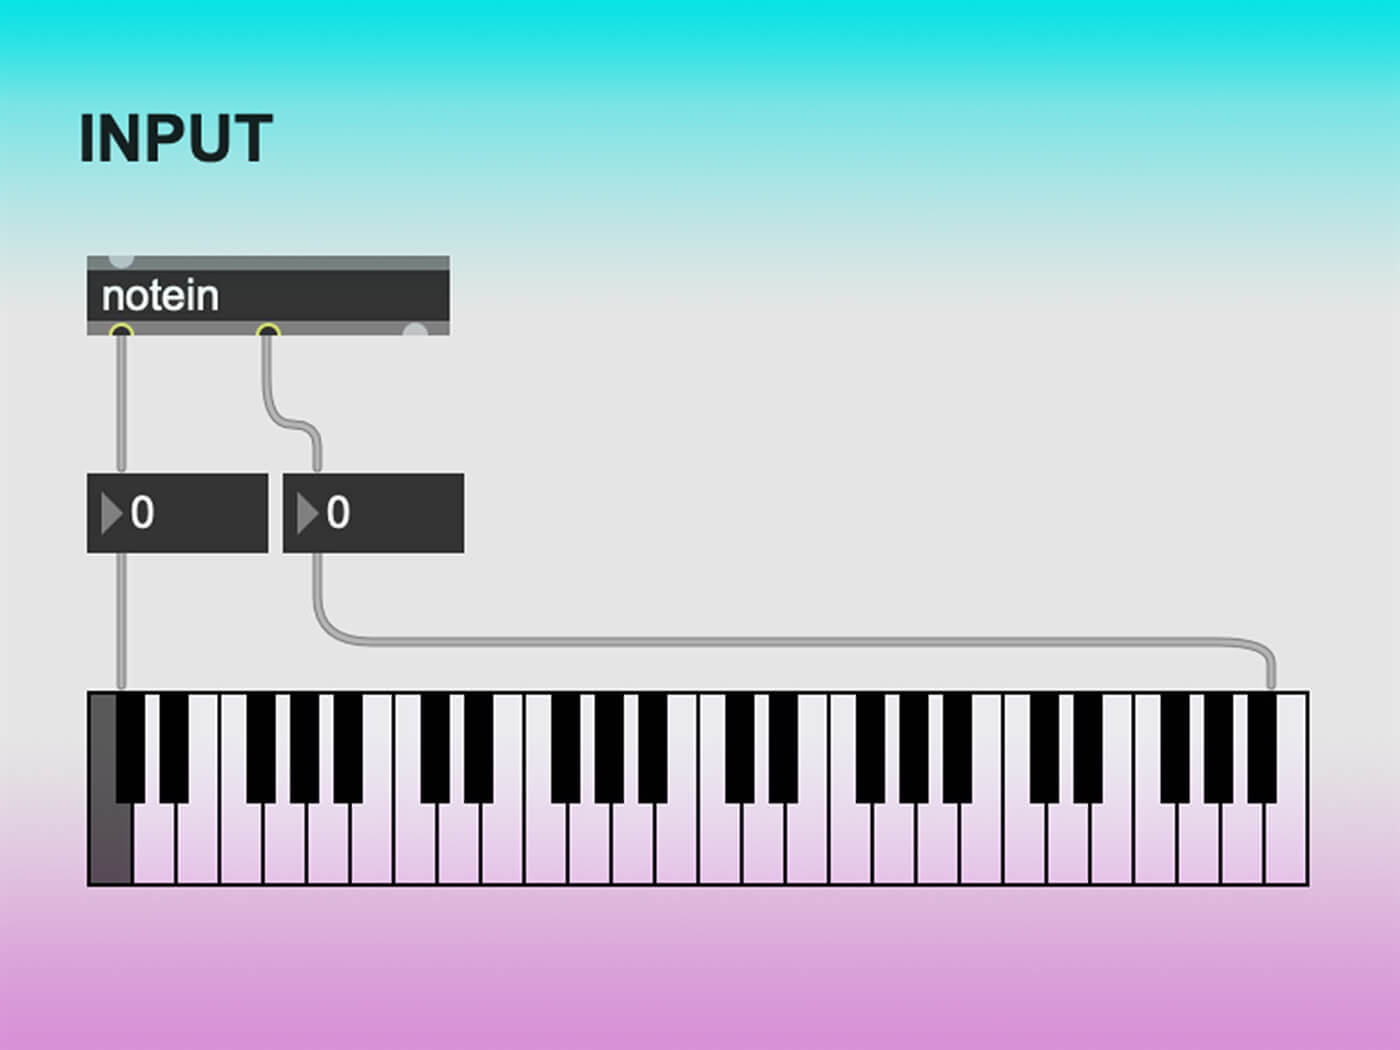 After connecting MIDI controller to patch and converting MIDI numbers to frequency value/pitch